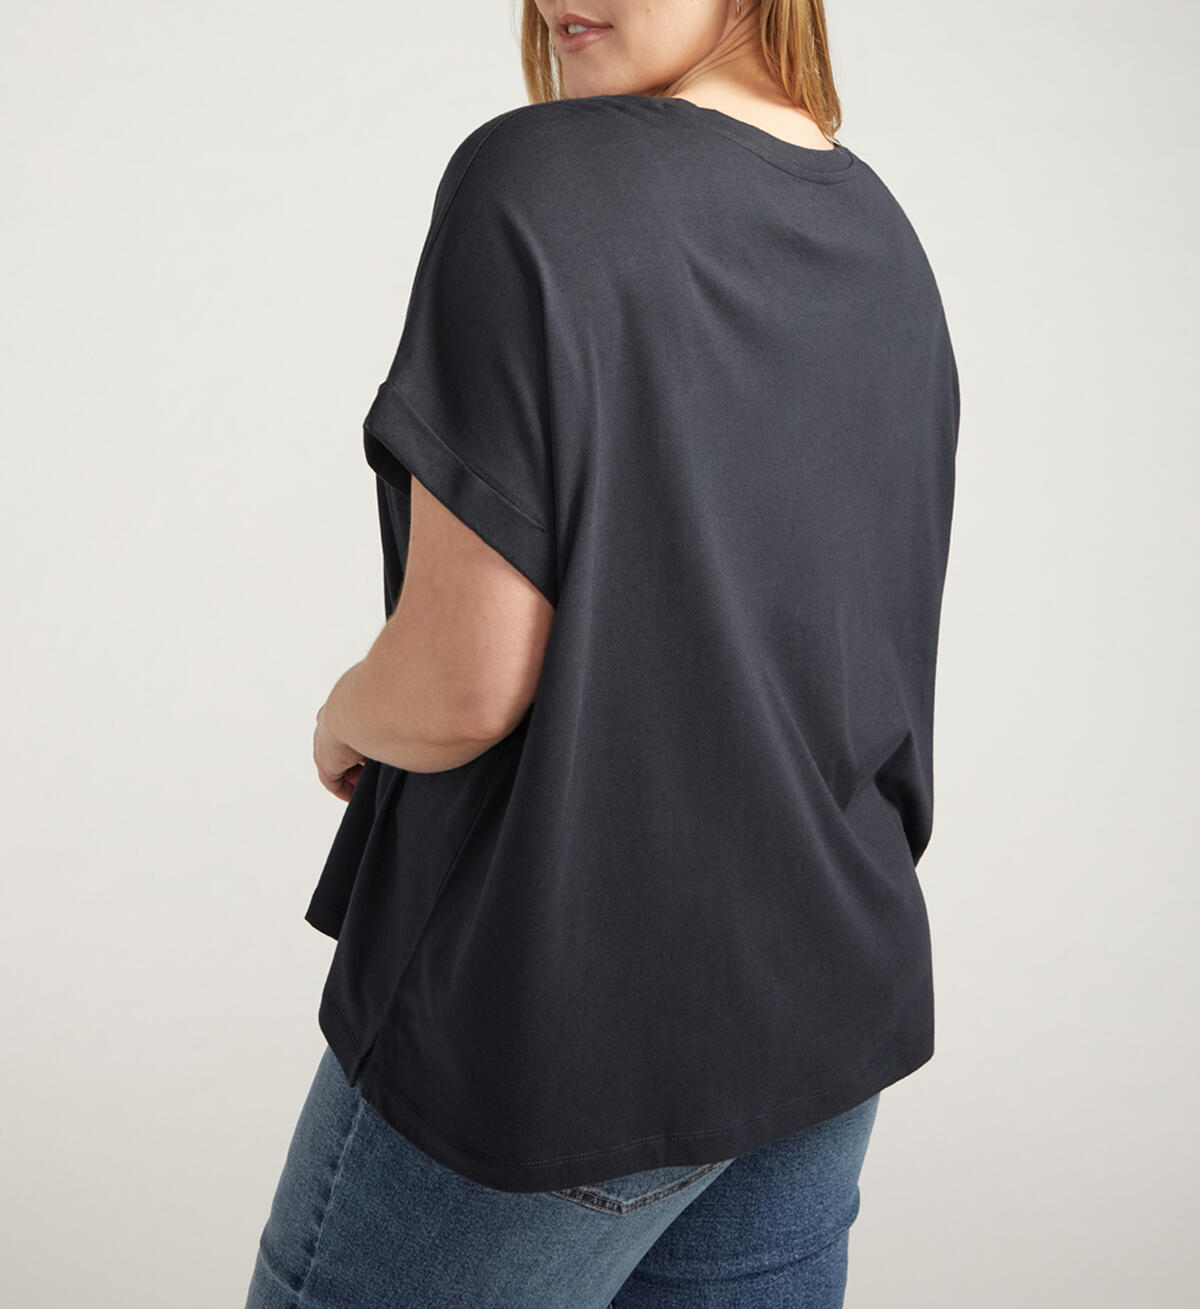 Drapey Luxe Tee Plus Size, , hi-res image number 3